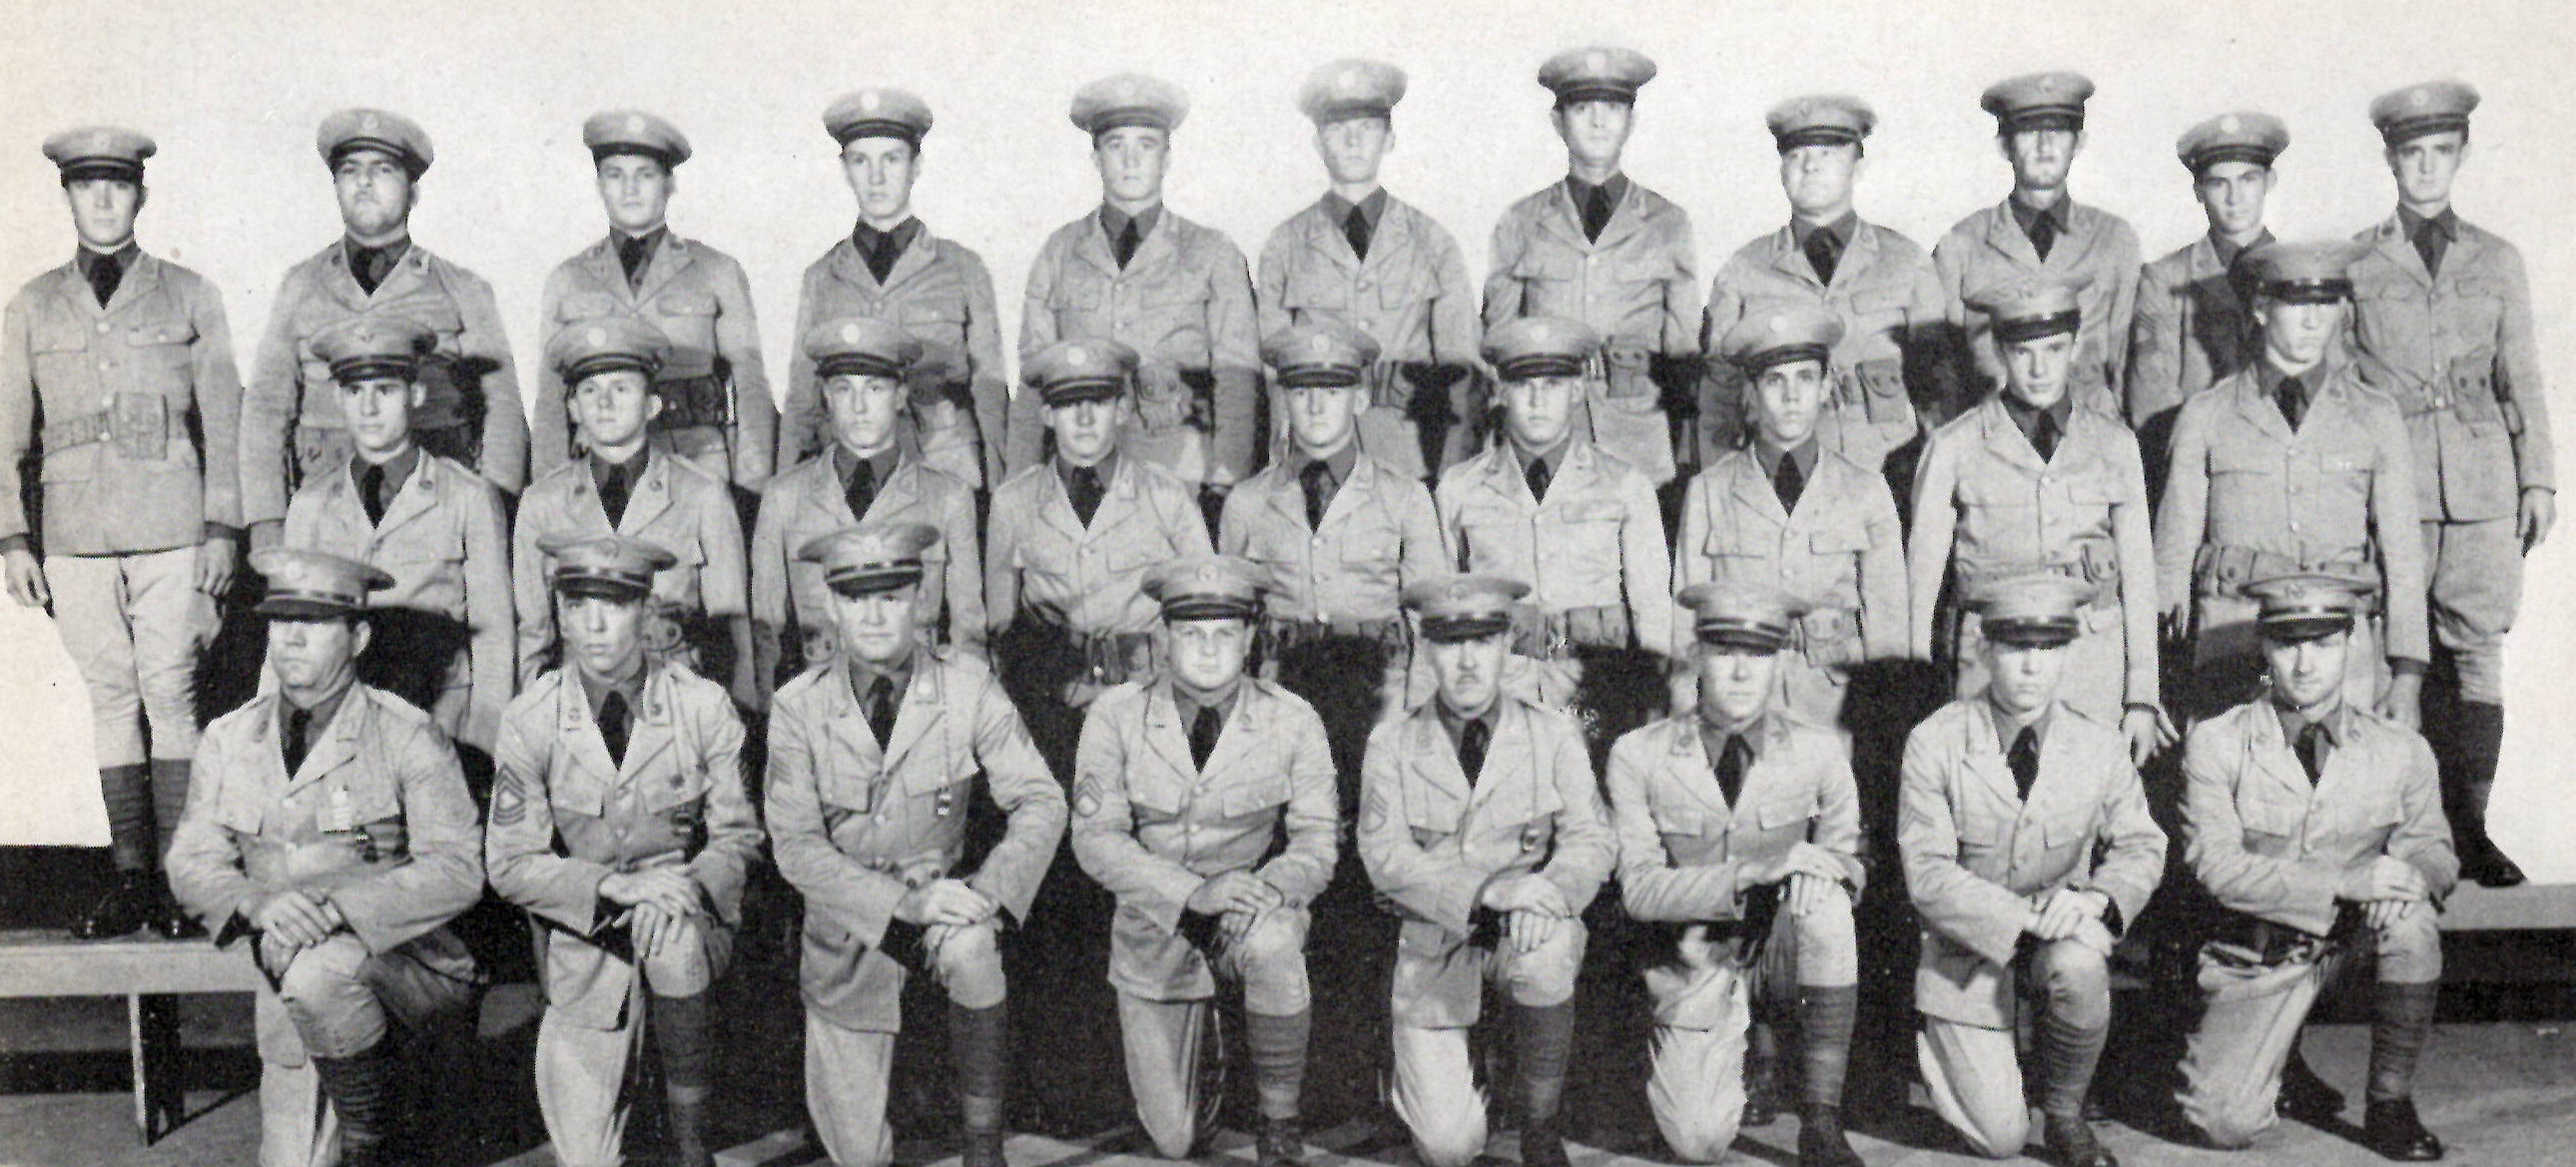 Service Company 141st Infantry 36th Division- 1940